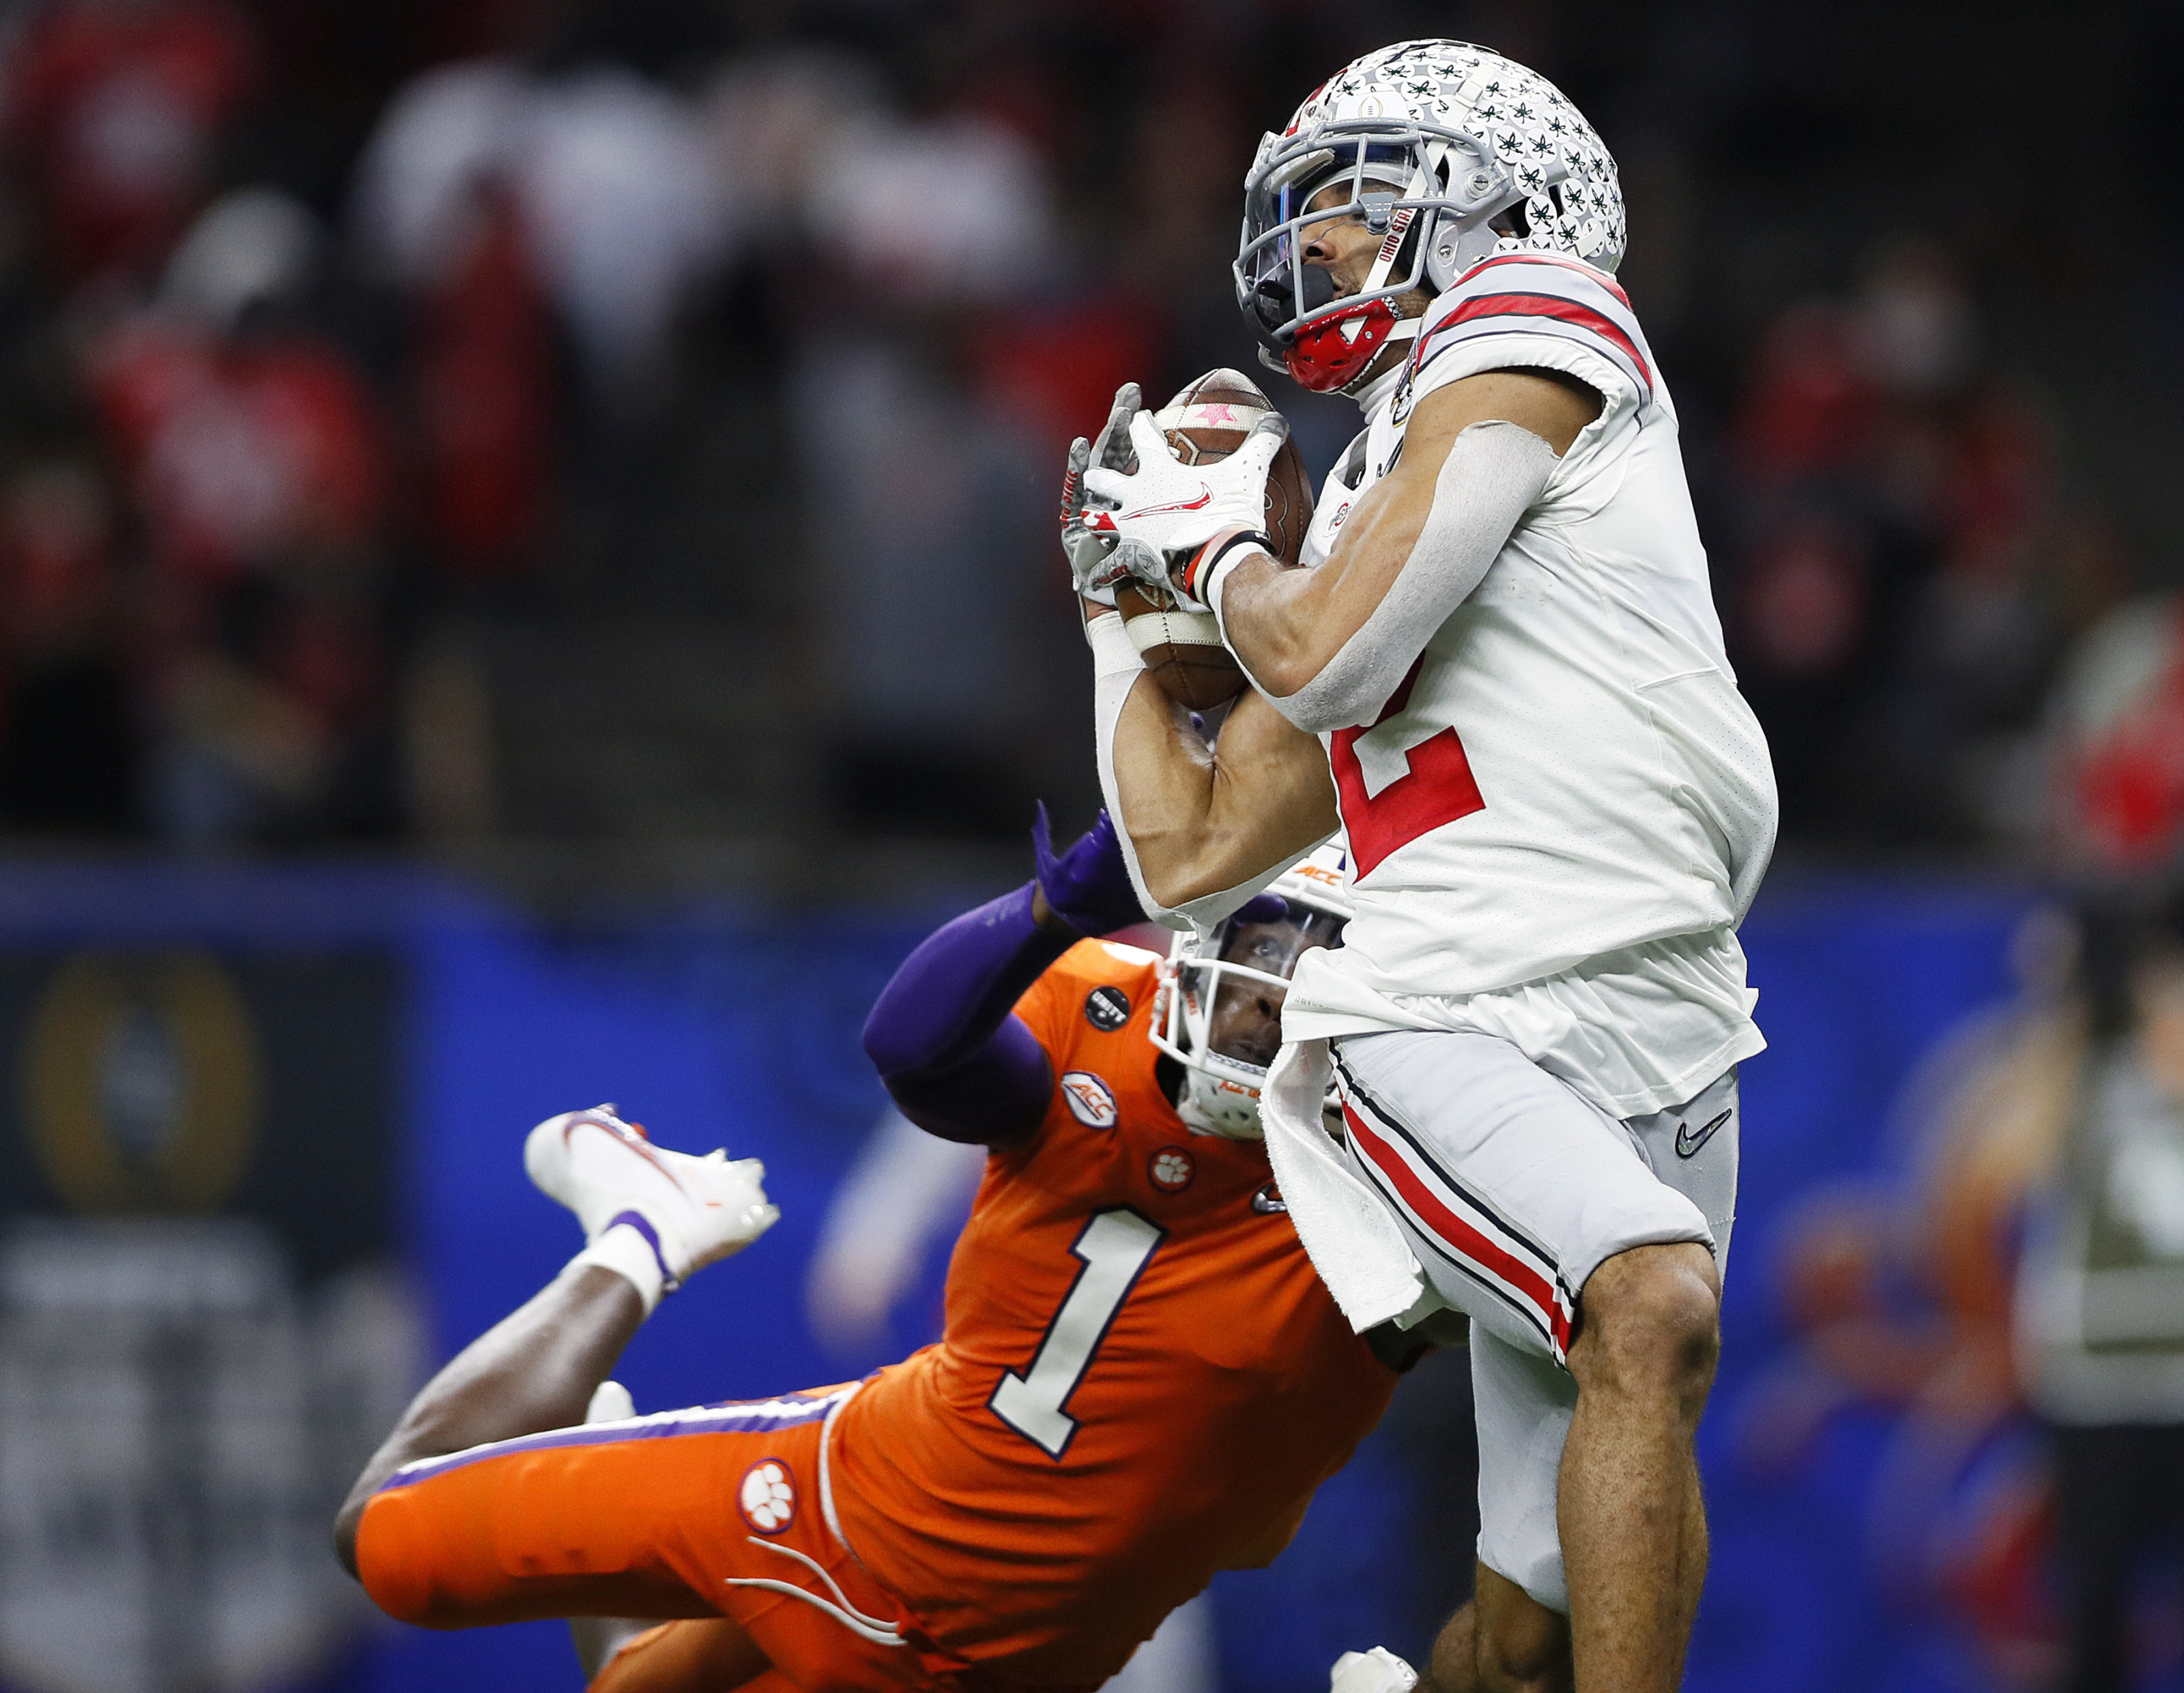 2022 NFL Draft notebook: Ohio State's dynamic duo and more - Page 6